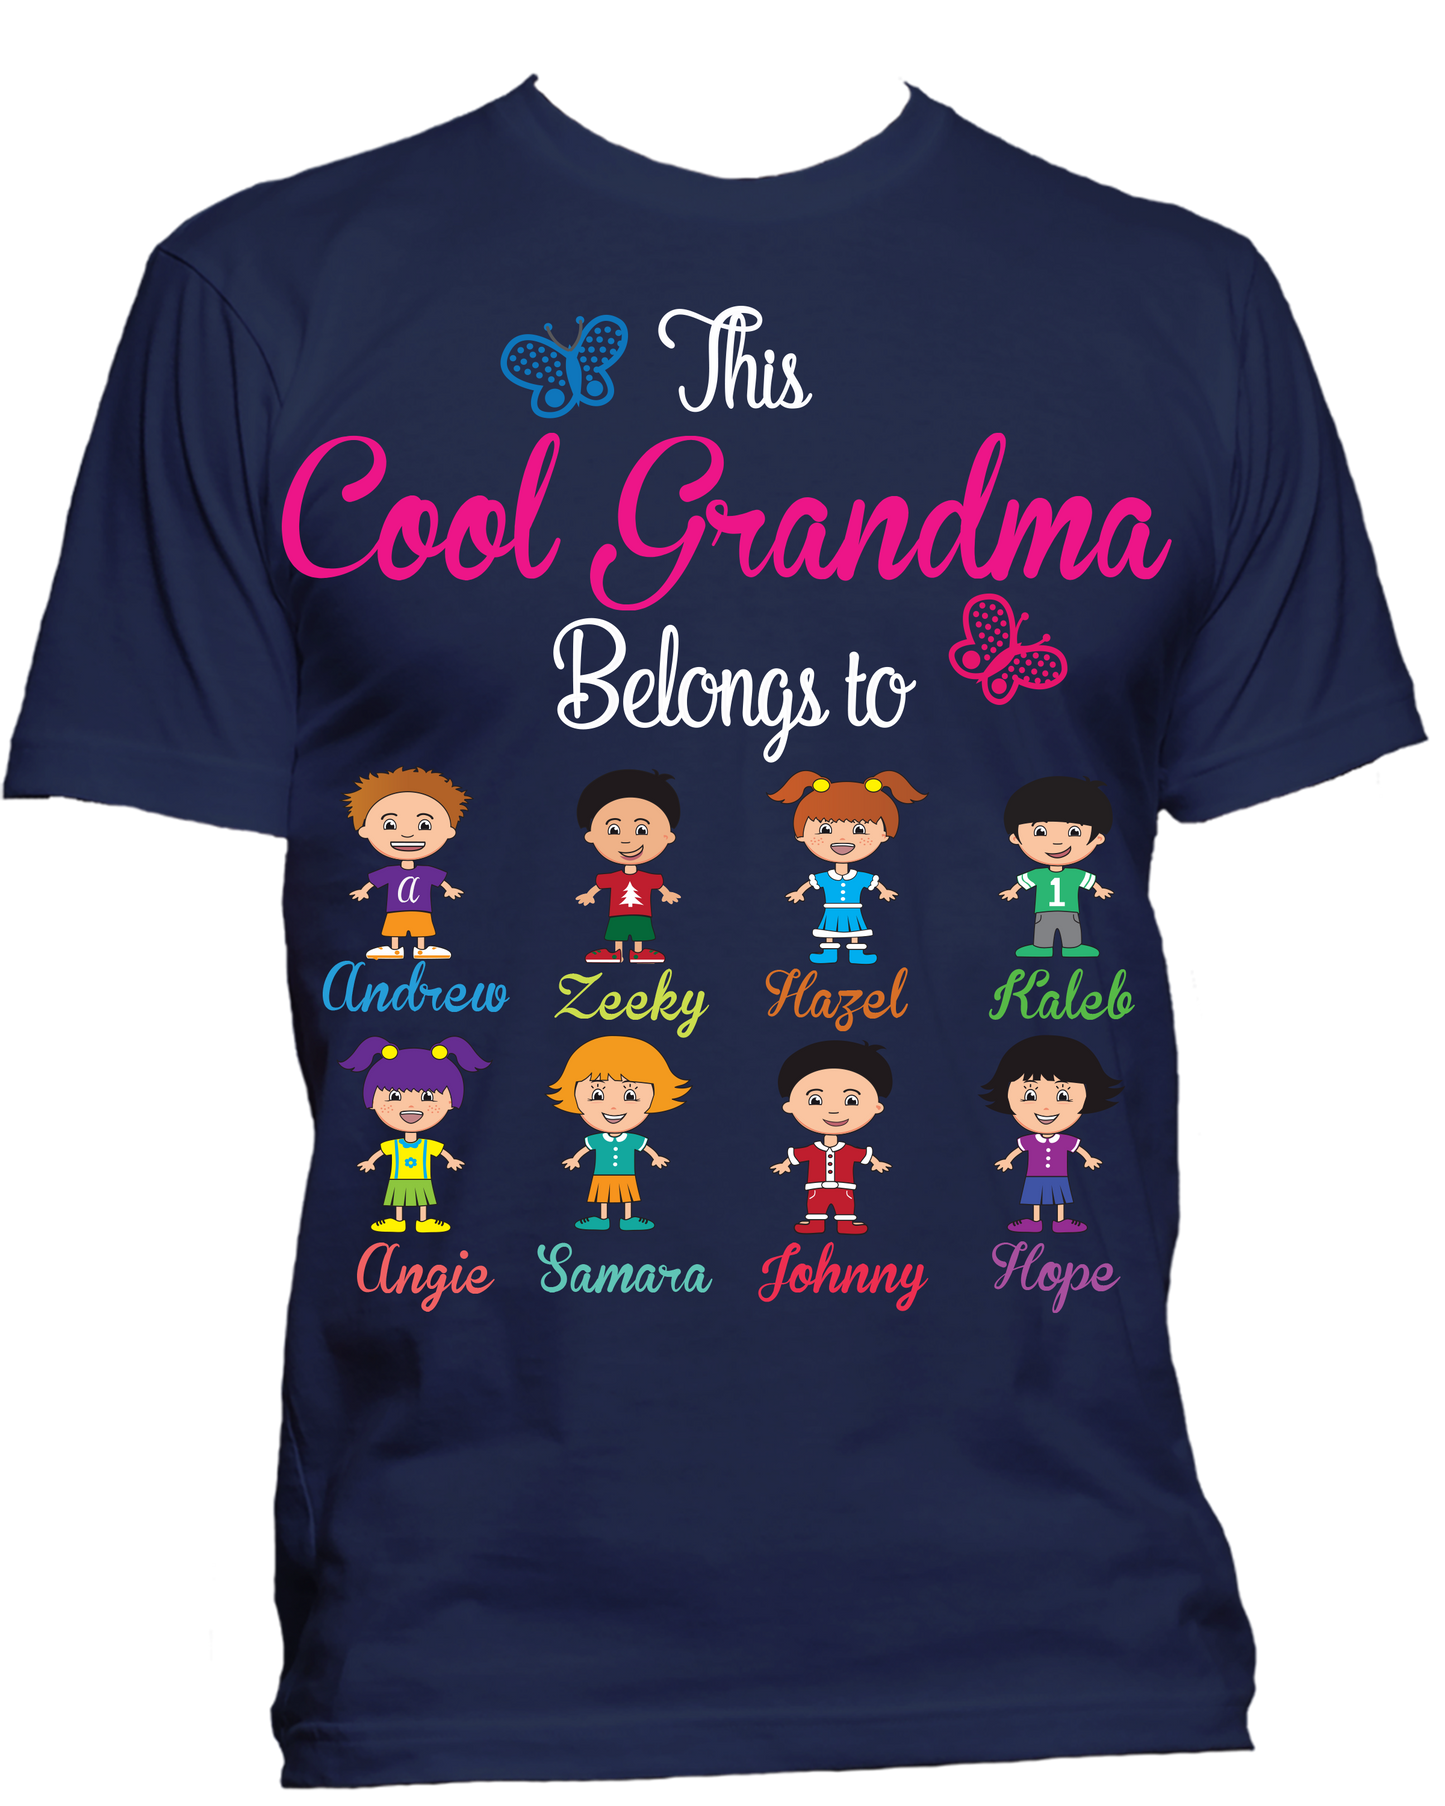 This Cool Grandma Belongs to T-Shirts Special Edition ***On Sale Today Only***